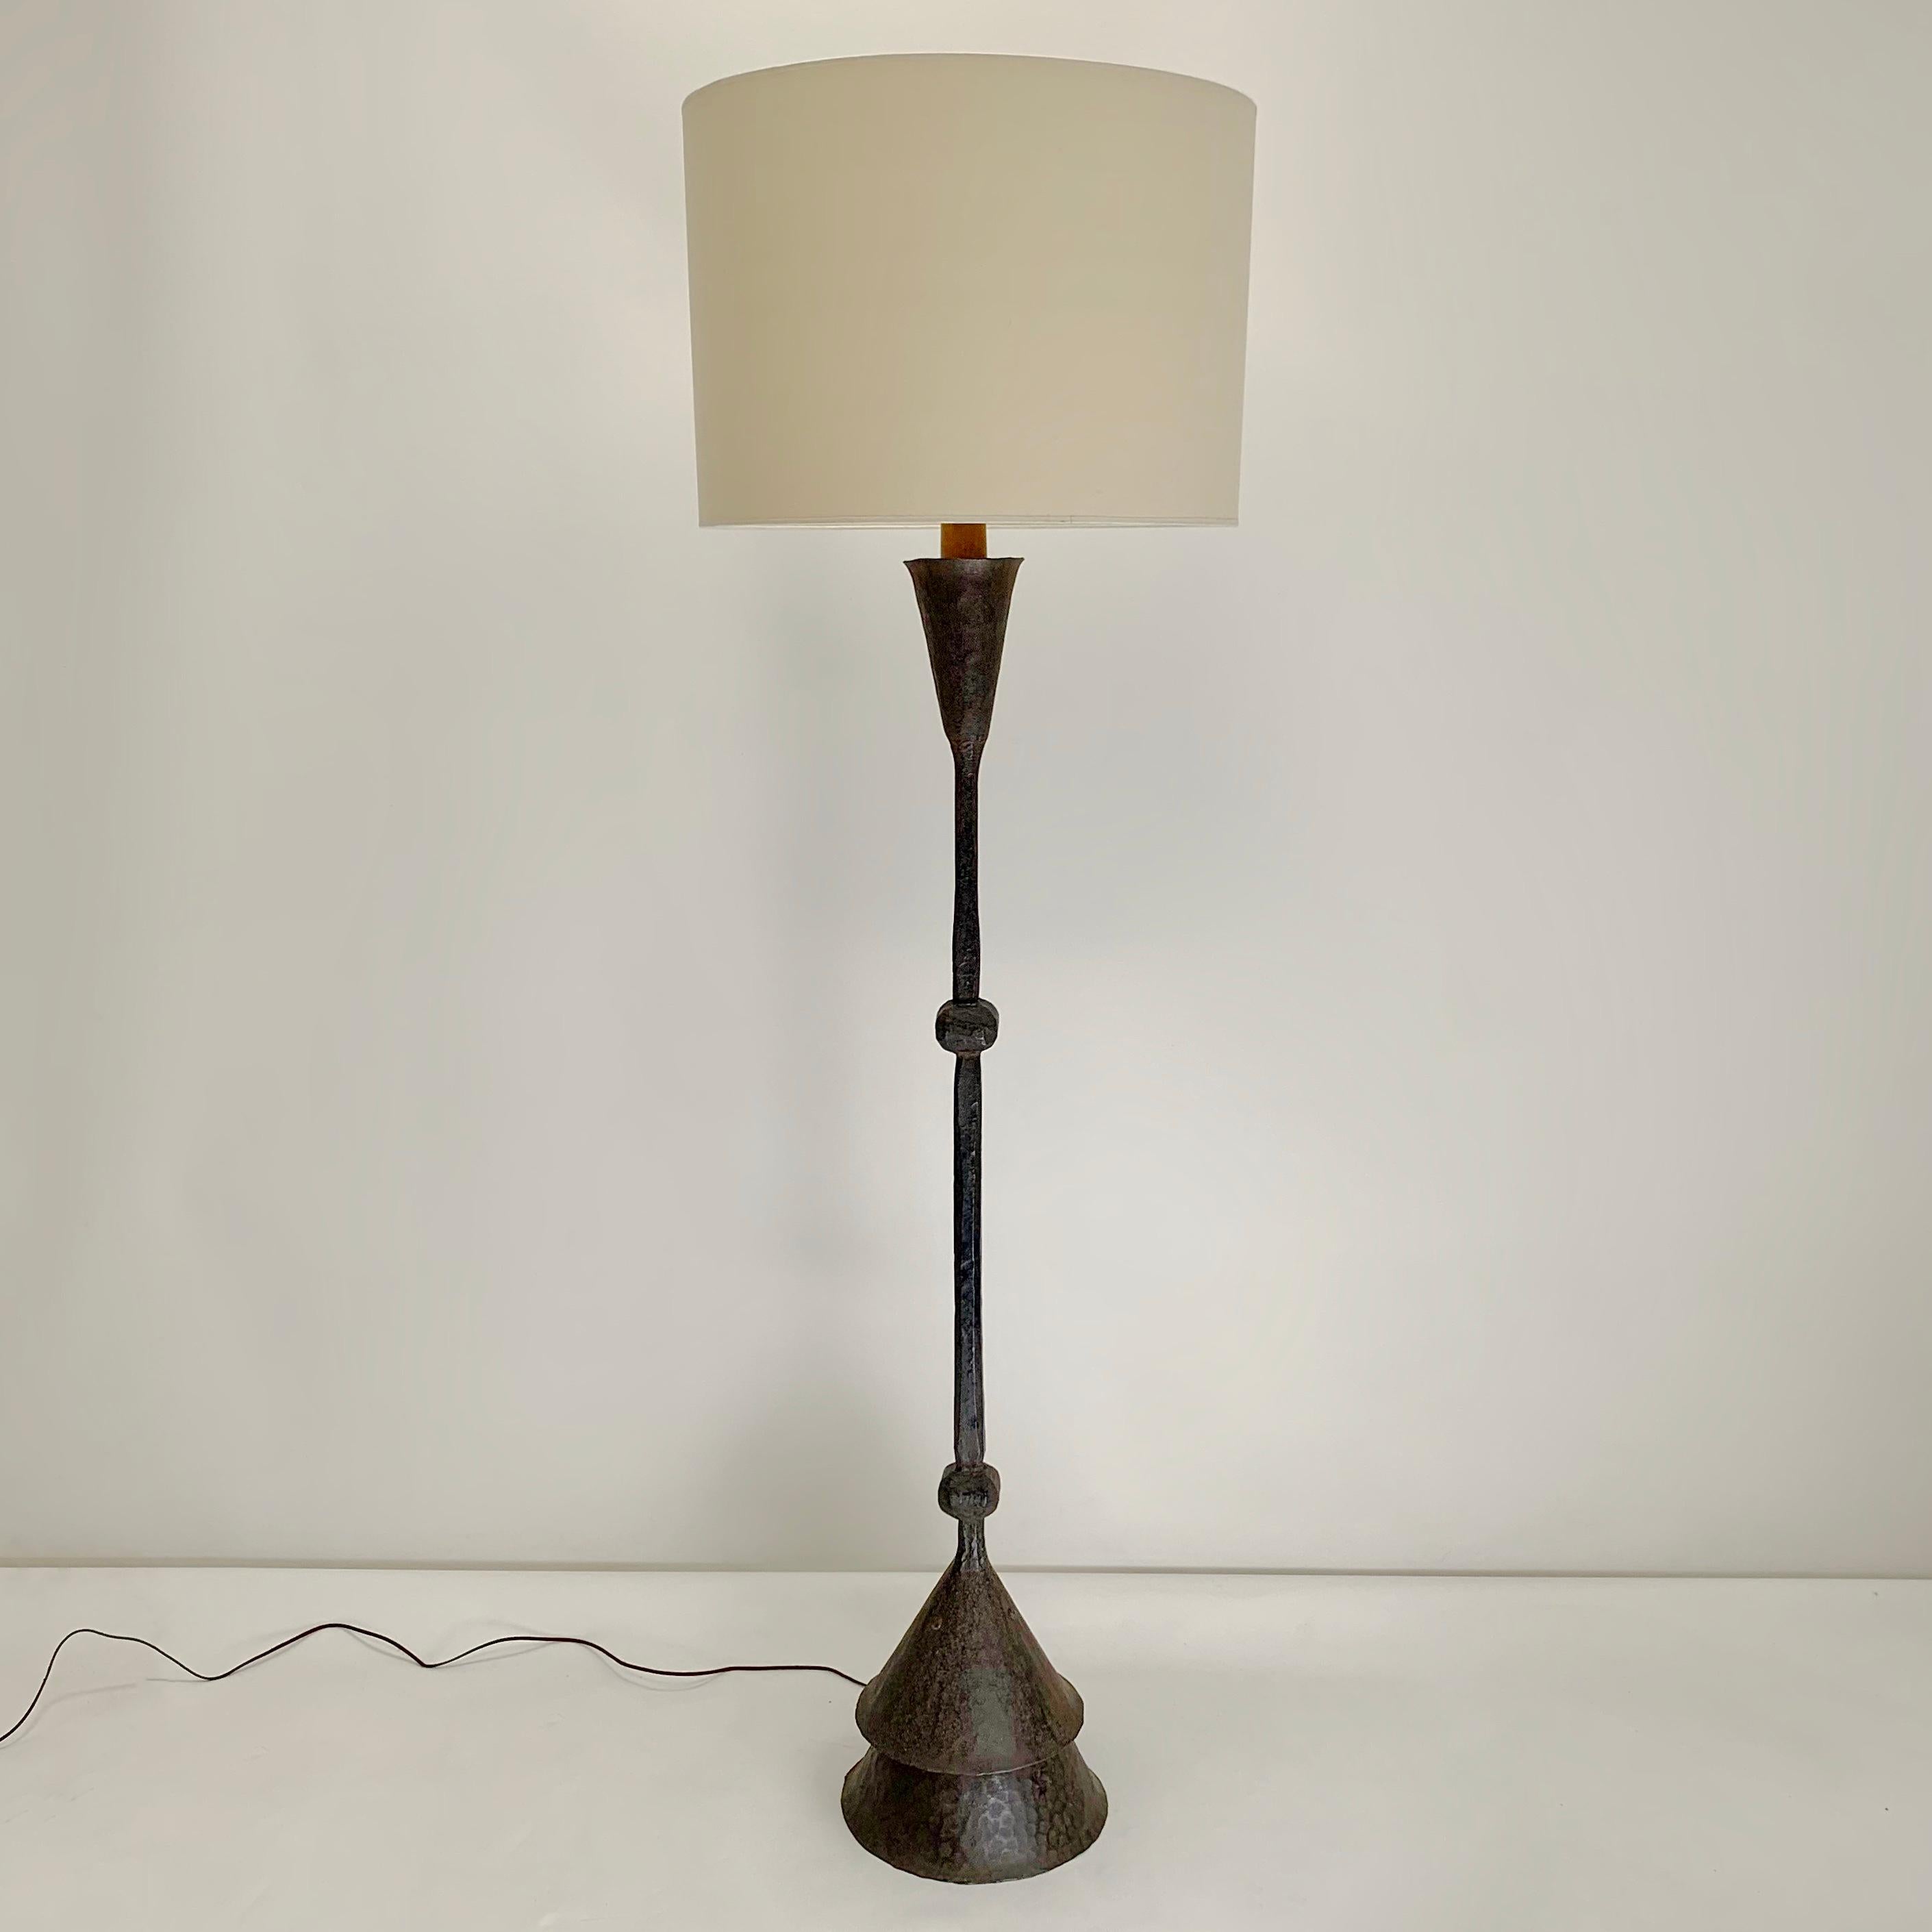 French Mid-Century Decorative Wrought Iron Floor Lamp, circa 1950, France. For Sale